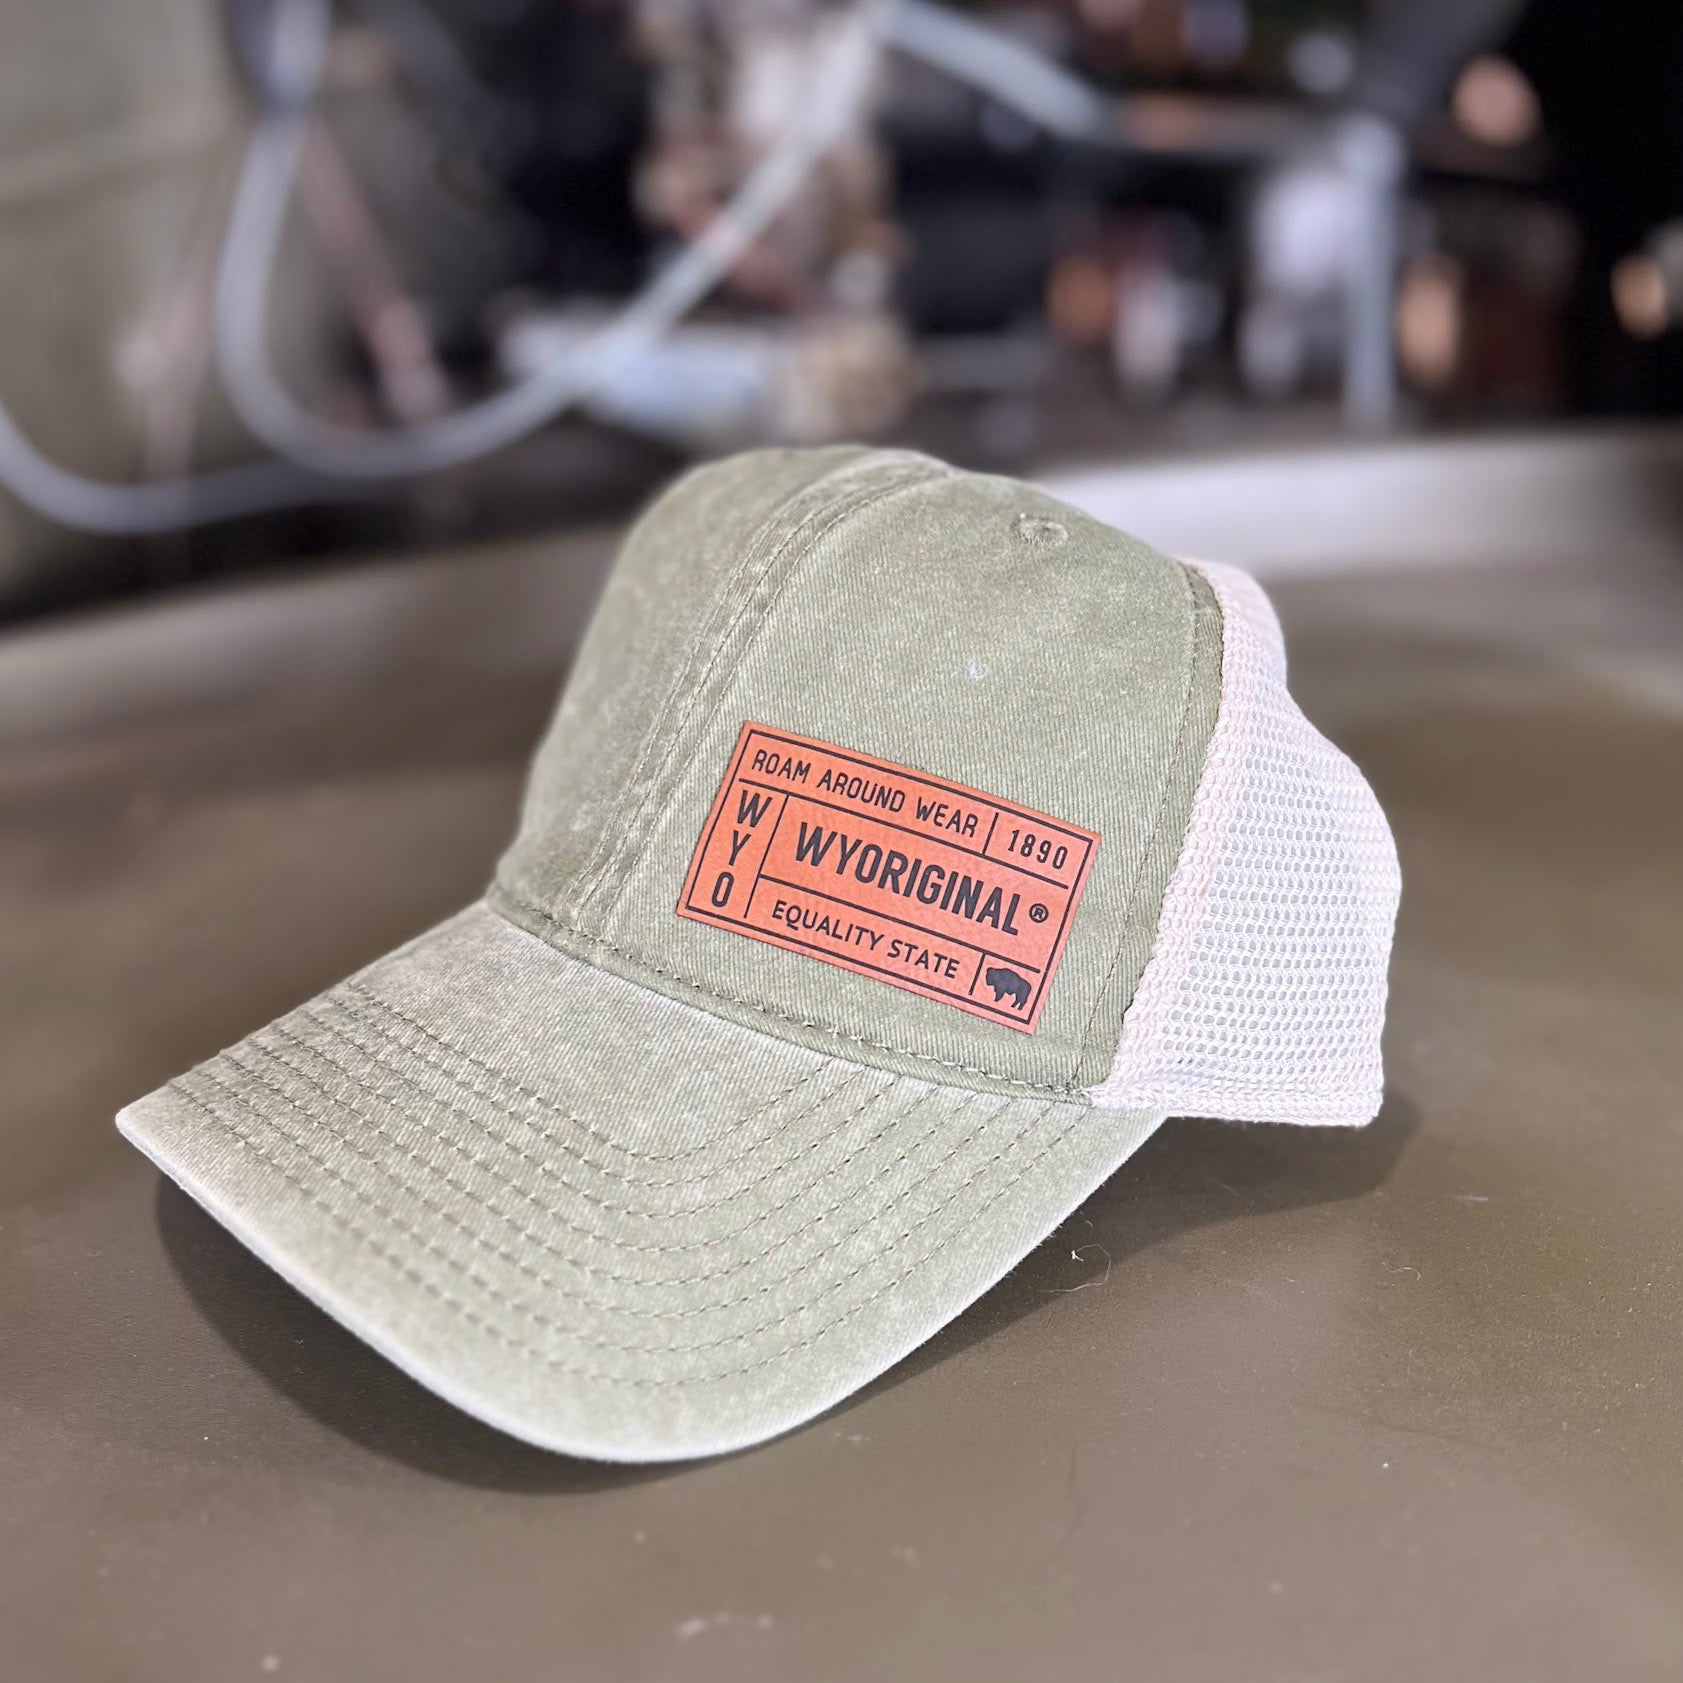 WYORIGINAL leather patch hat. Olive leather patch hat. Roam Around Wear is a Wyoming t-shirt company based in Gillette, Wyoming